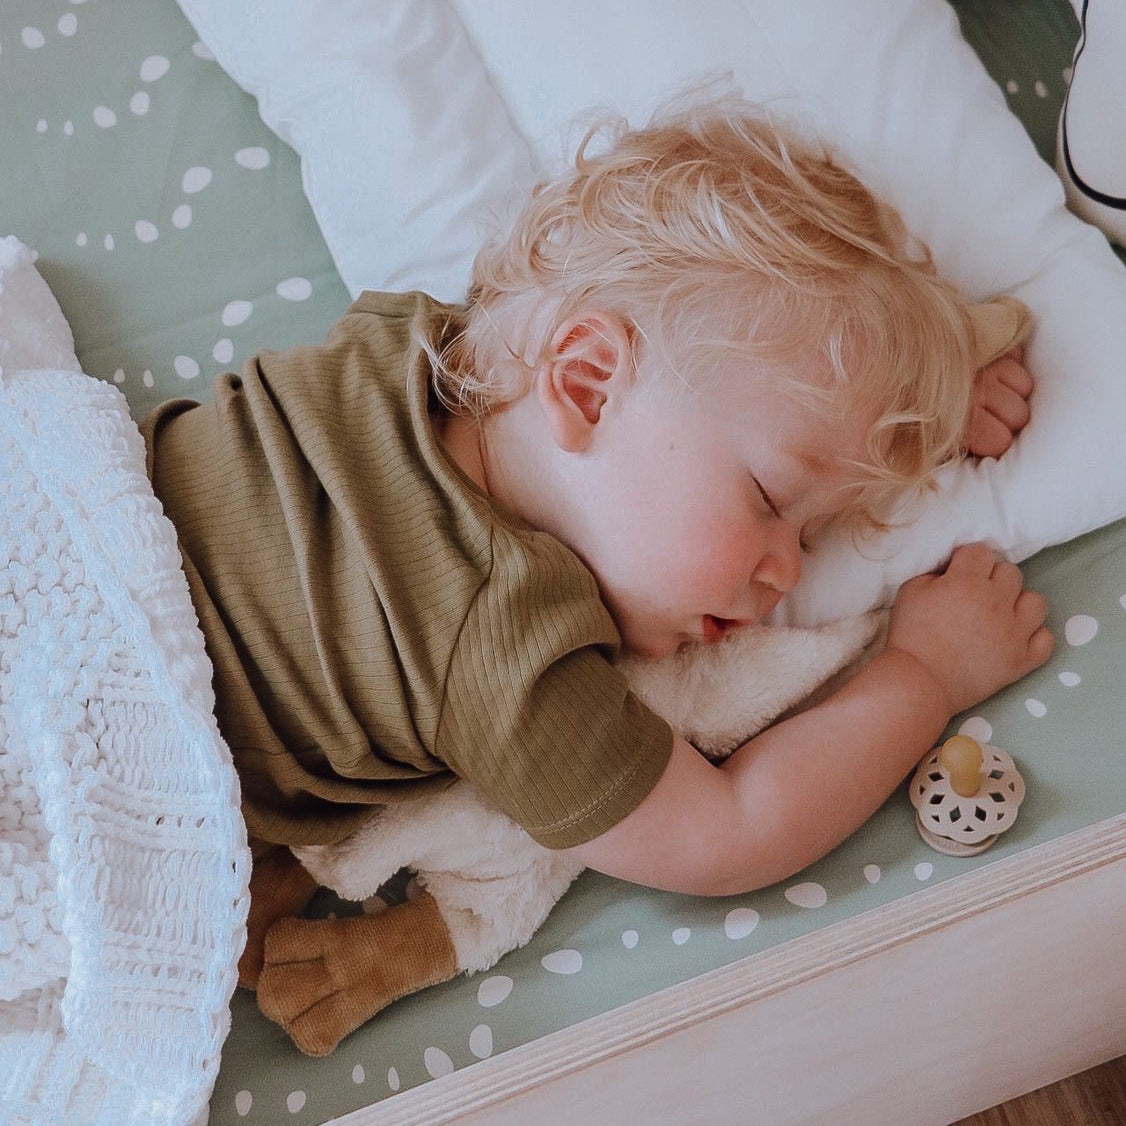 A sleeping baby wearing a yellow onesie, snuggling a duck toy on top of an Oolie organic cotton crib sheet with the sage stones print, a soft green color with white bubbles or irregular stone shapes.